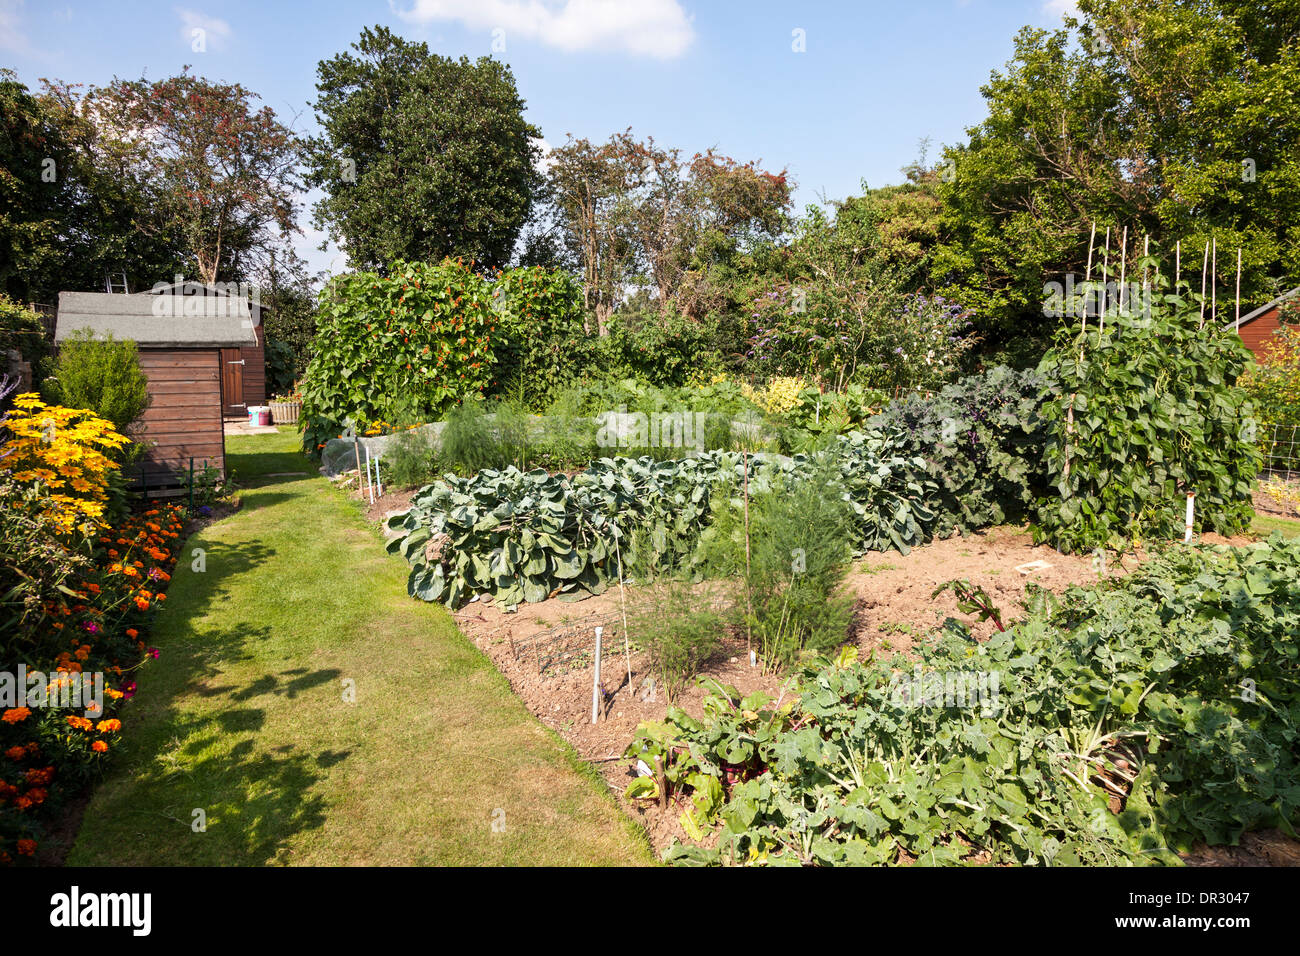 Traditional vegetable patch in an English garden Stock Photo